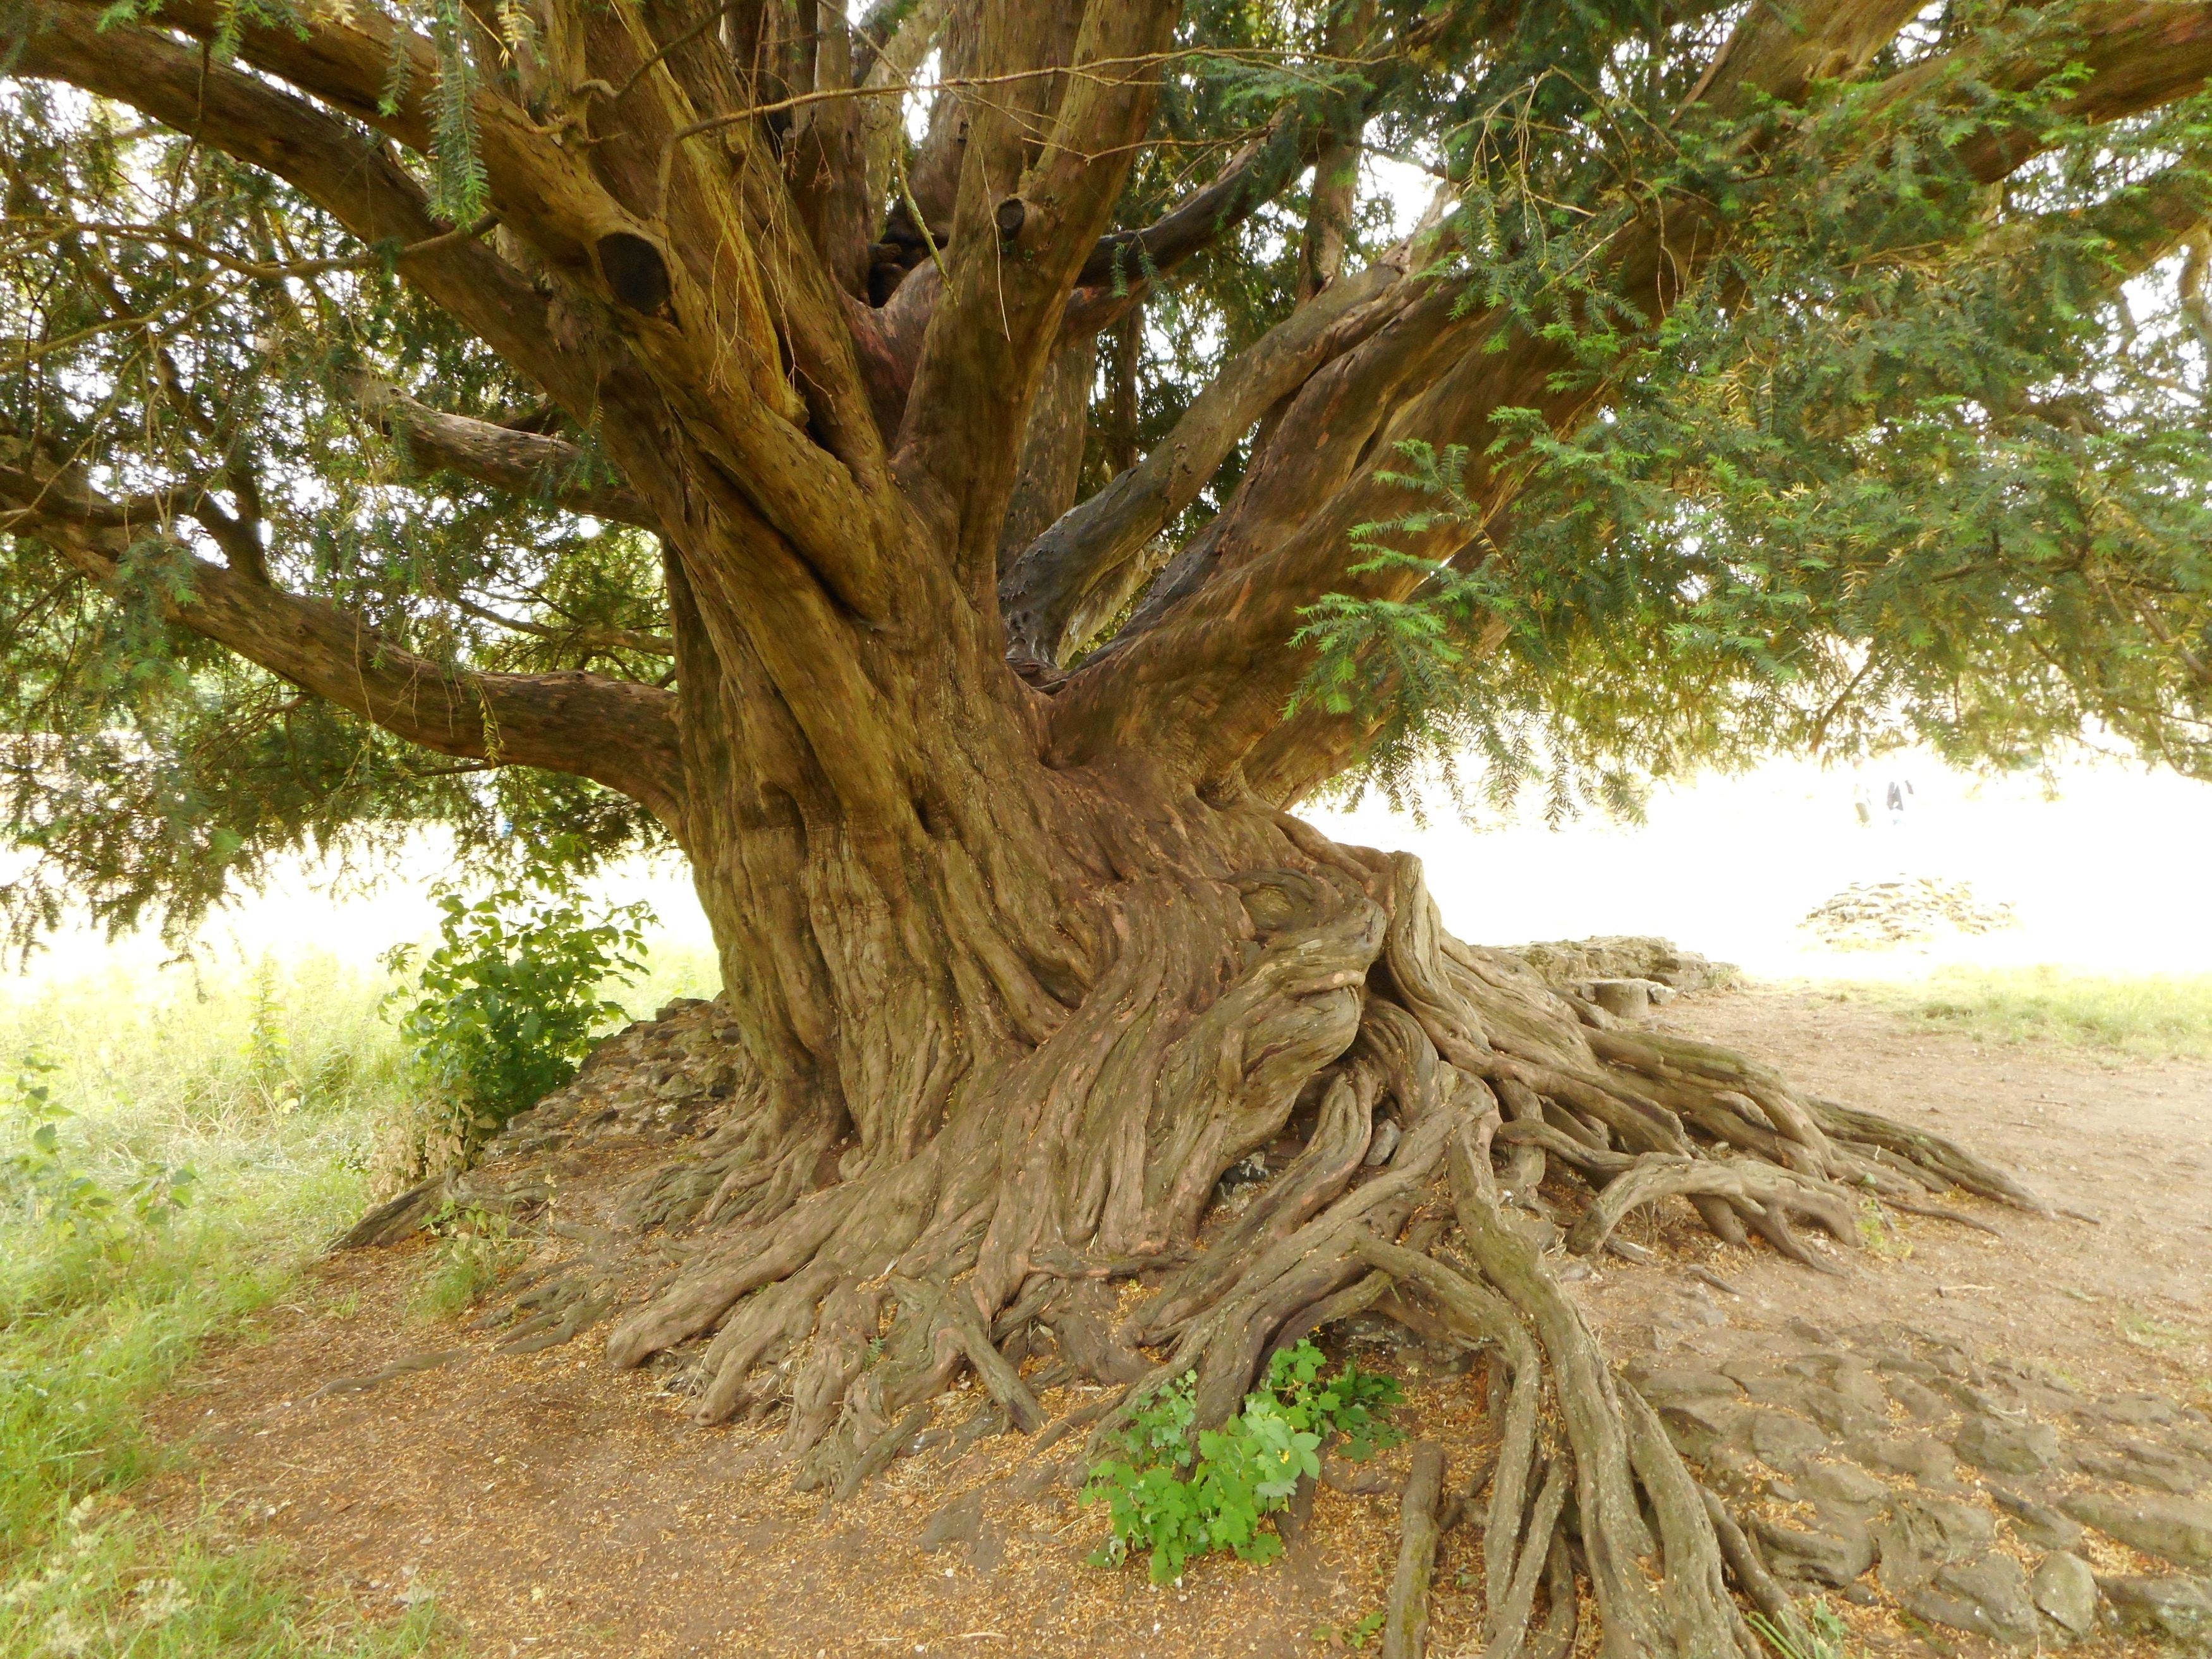 The gnarled roots of the Waverley Abbey Yew